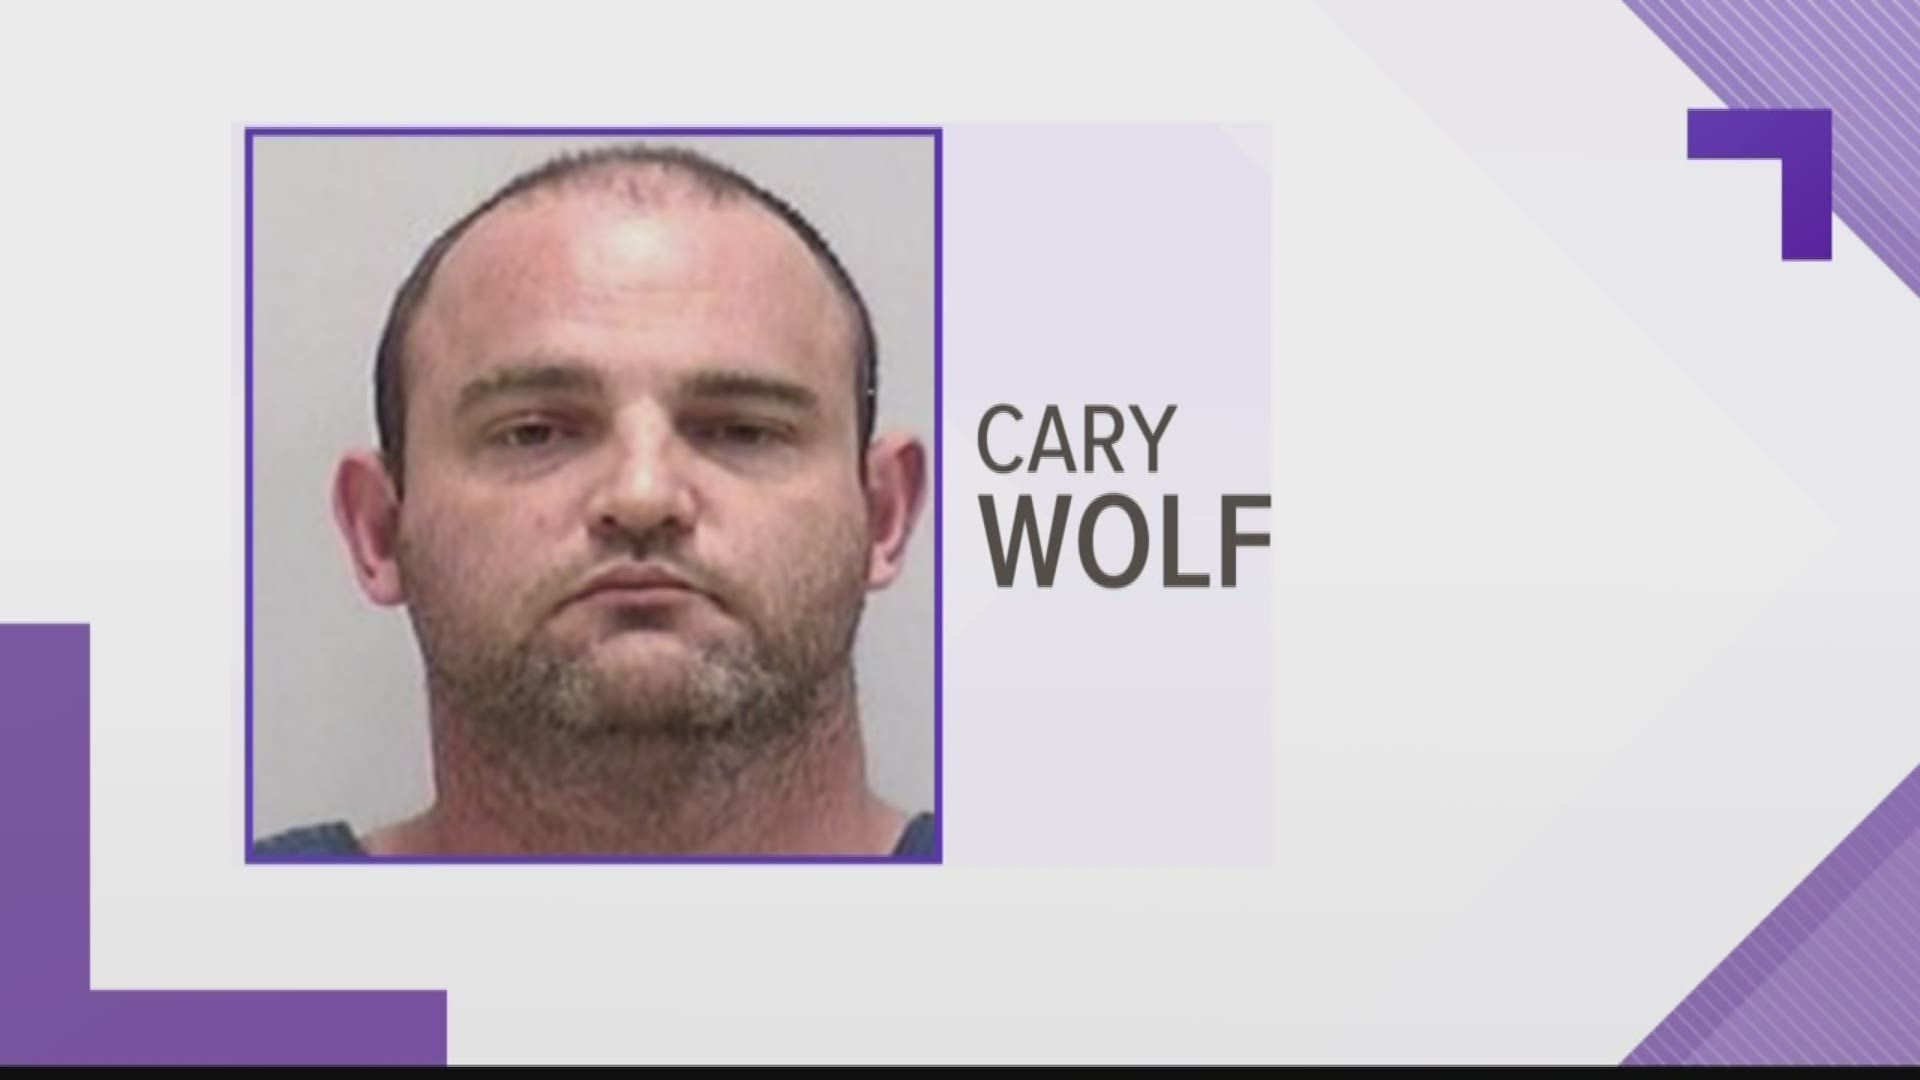 Bartow County Firefighter Cary Wolf, 36, allegedly burglarized a home off Old Mill Road in White, Ga. on Oct. 4, stole multiple items and pawned at a local pawn shop